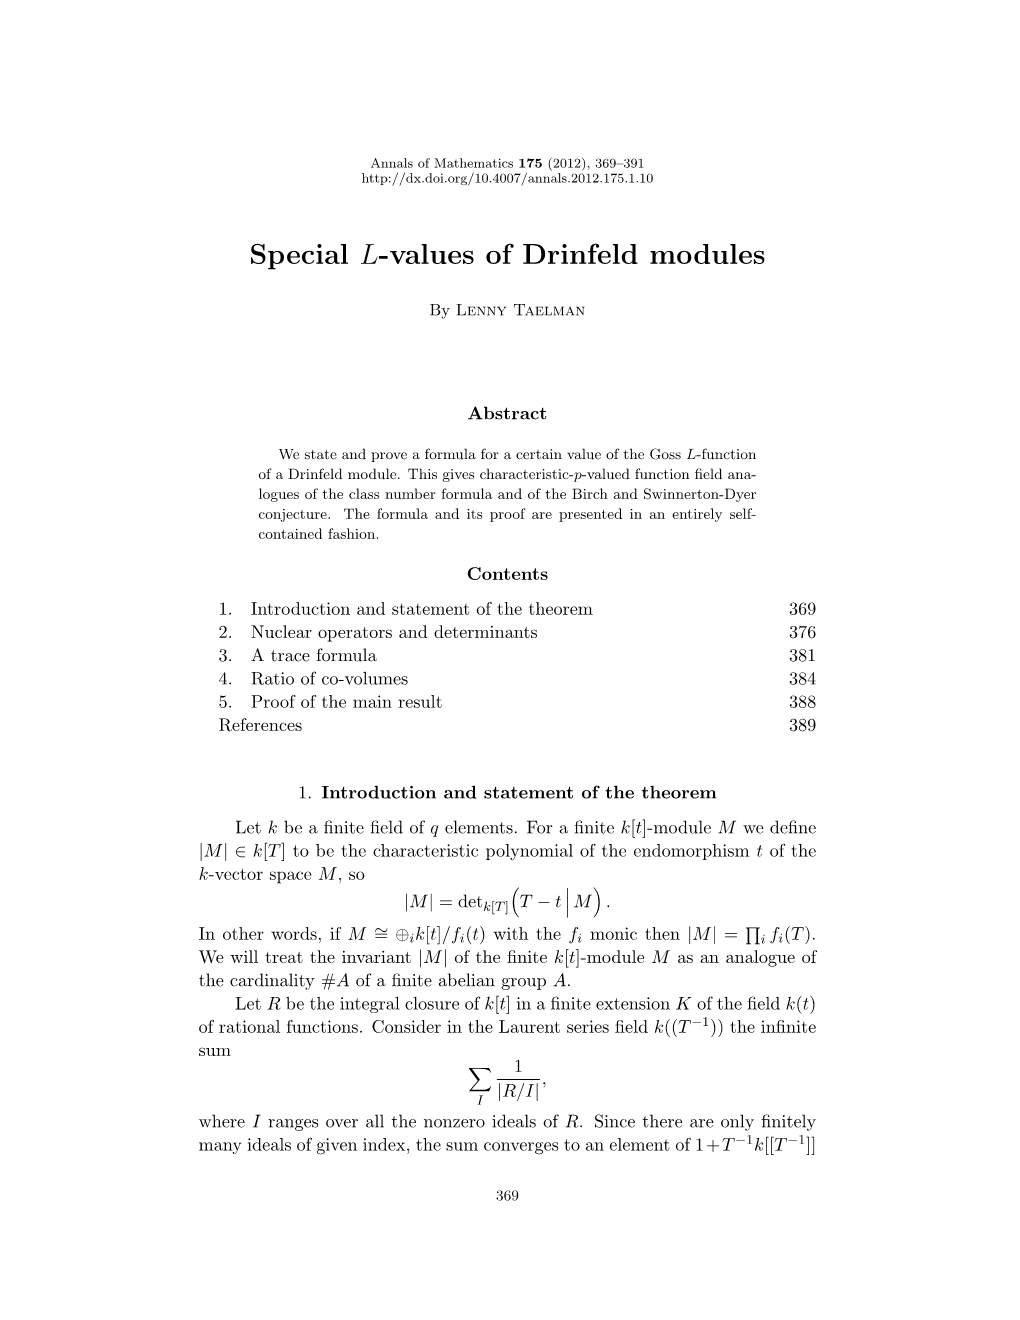 Special L-Values of Drinfeld Modules